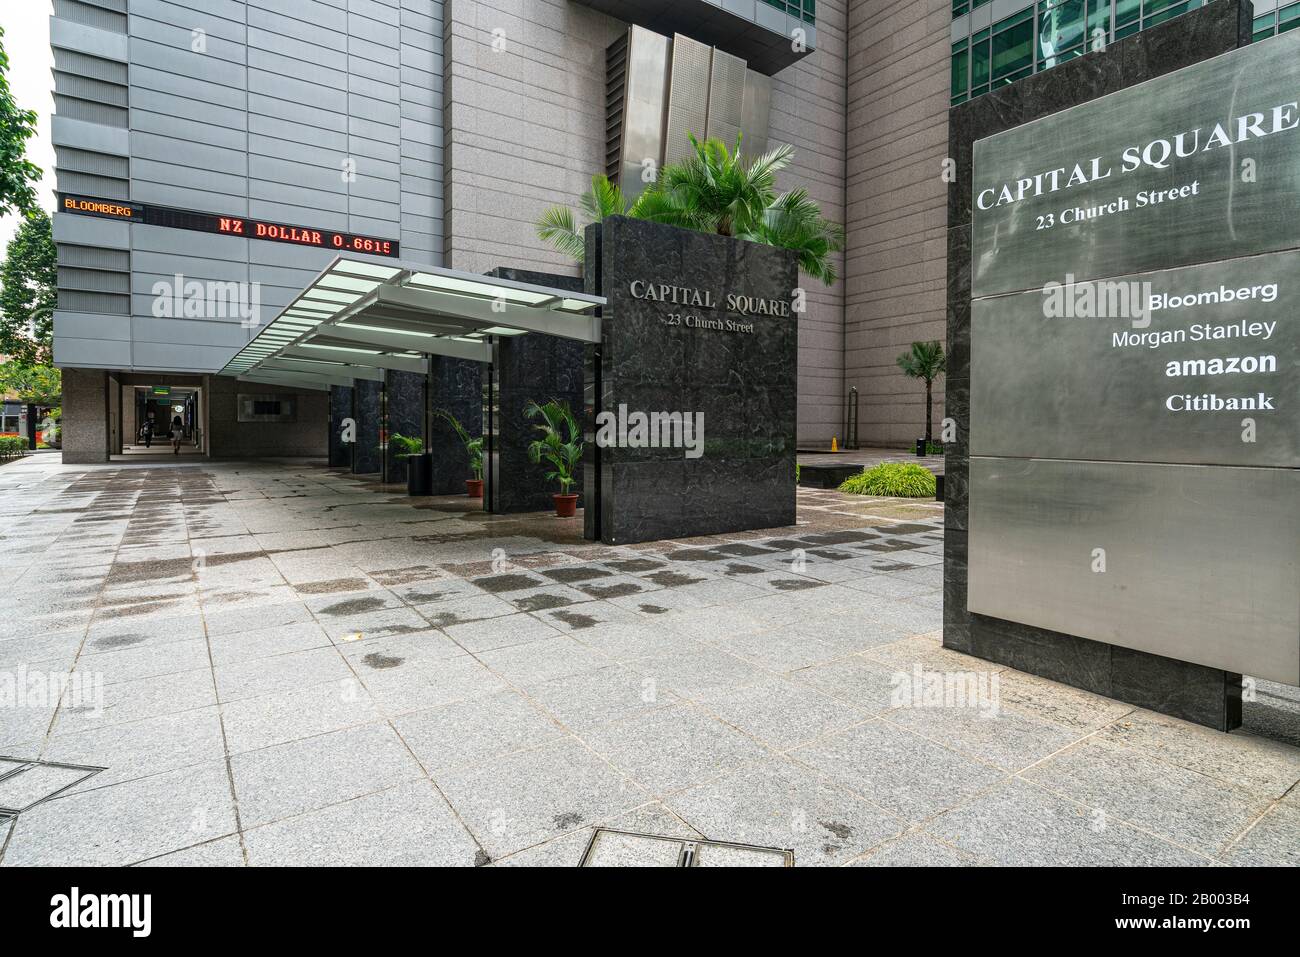 Singapore. January 2020.   The Capital Square business center sign Stock Photo